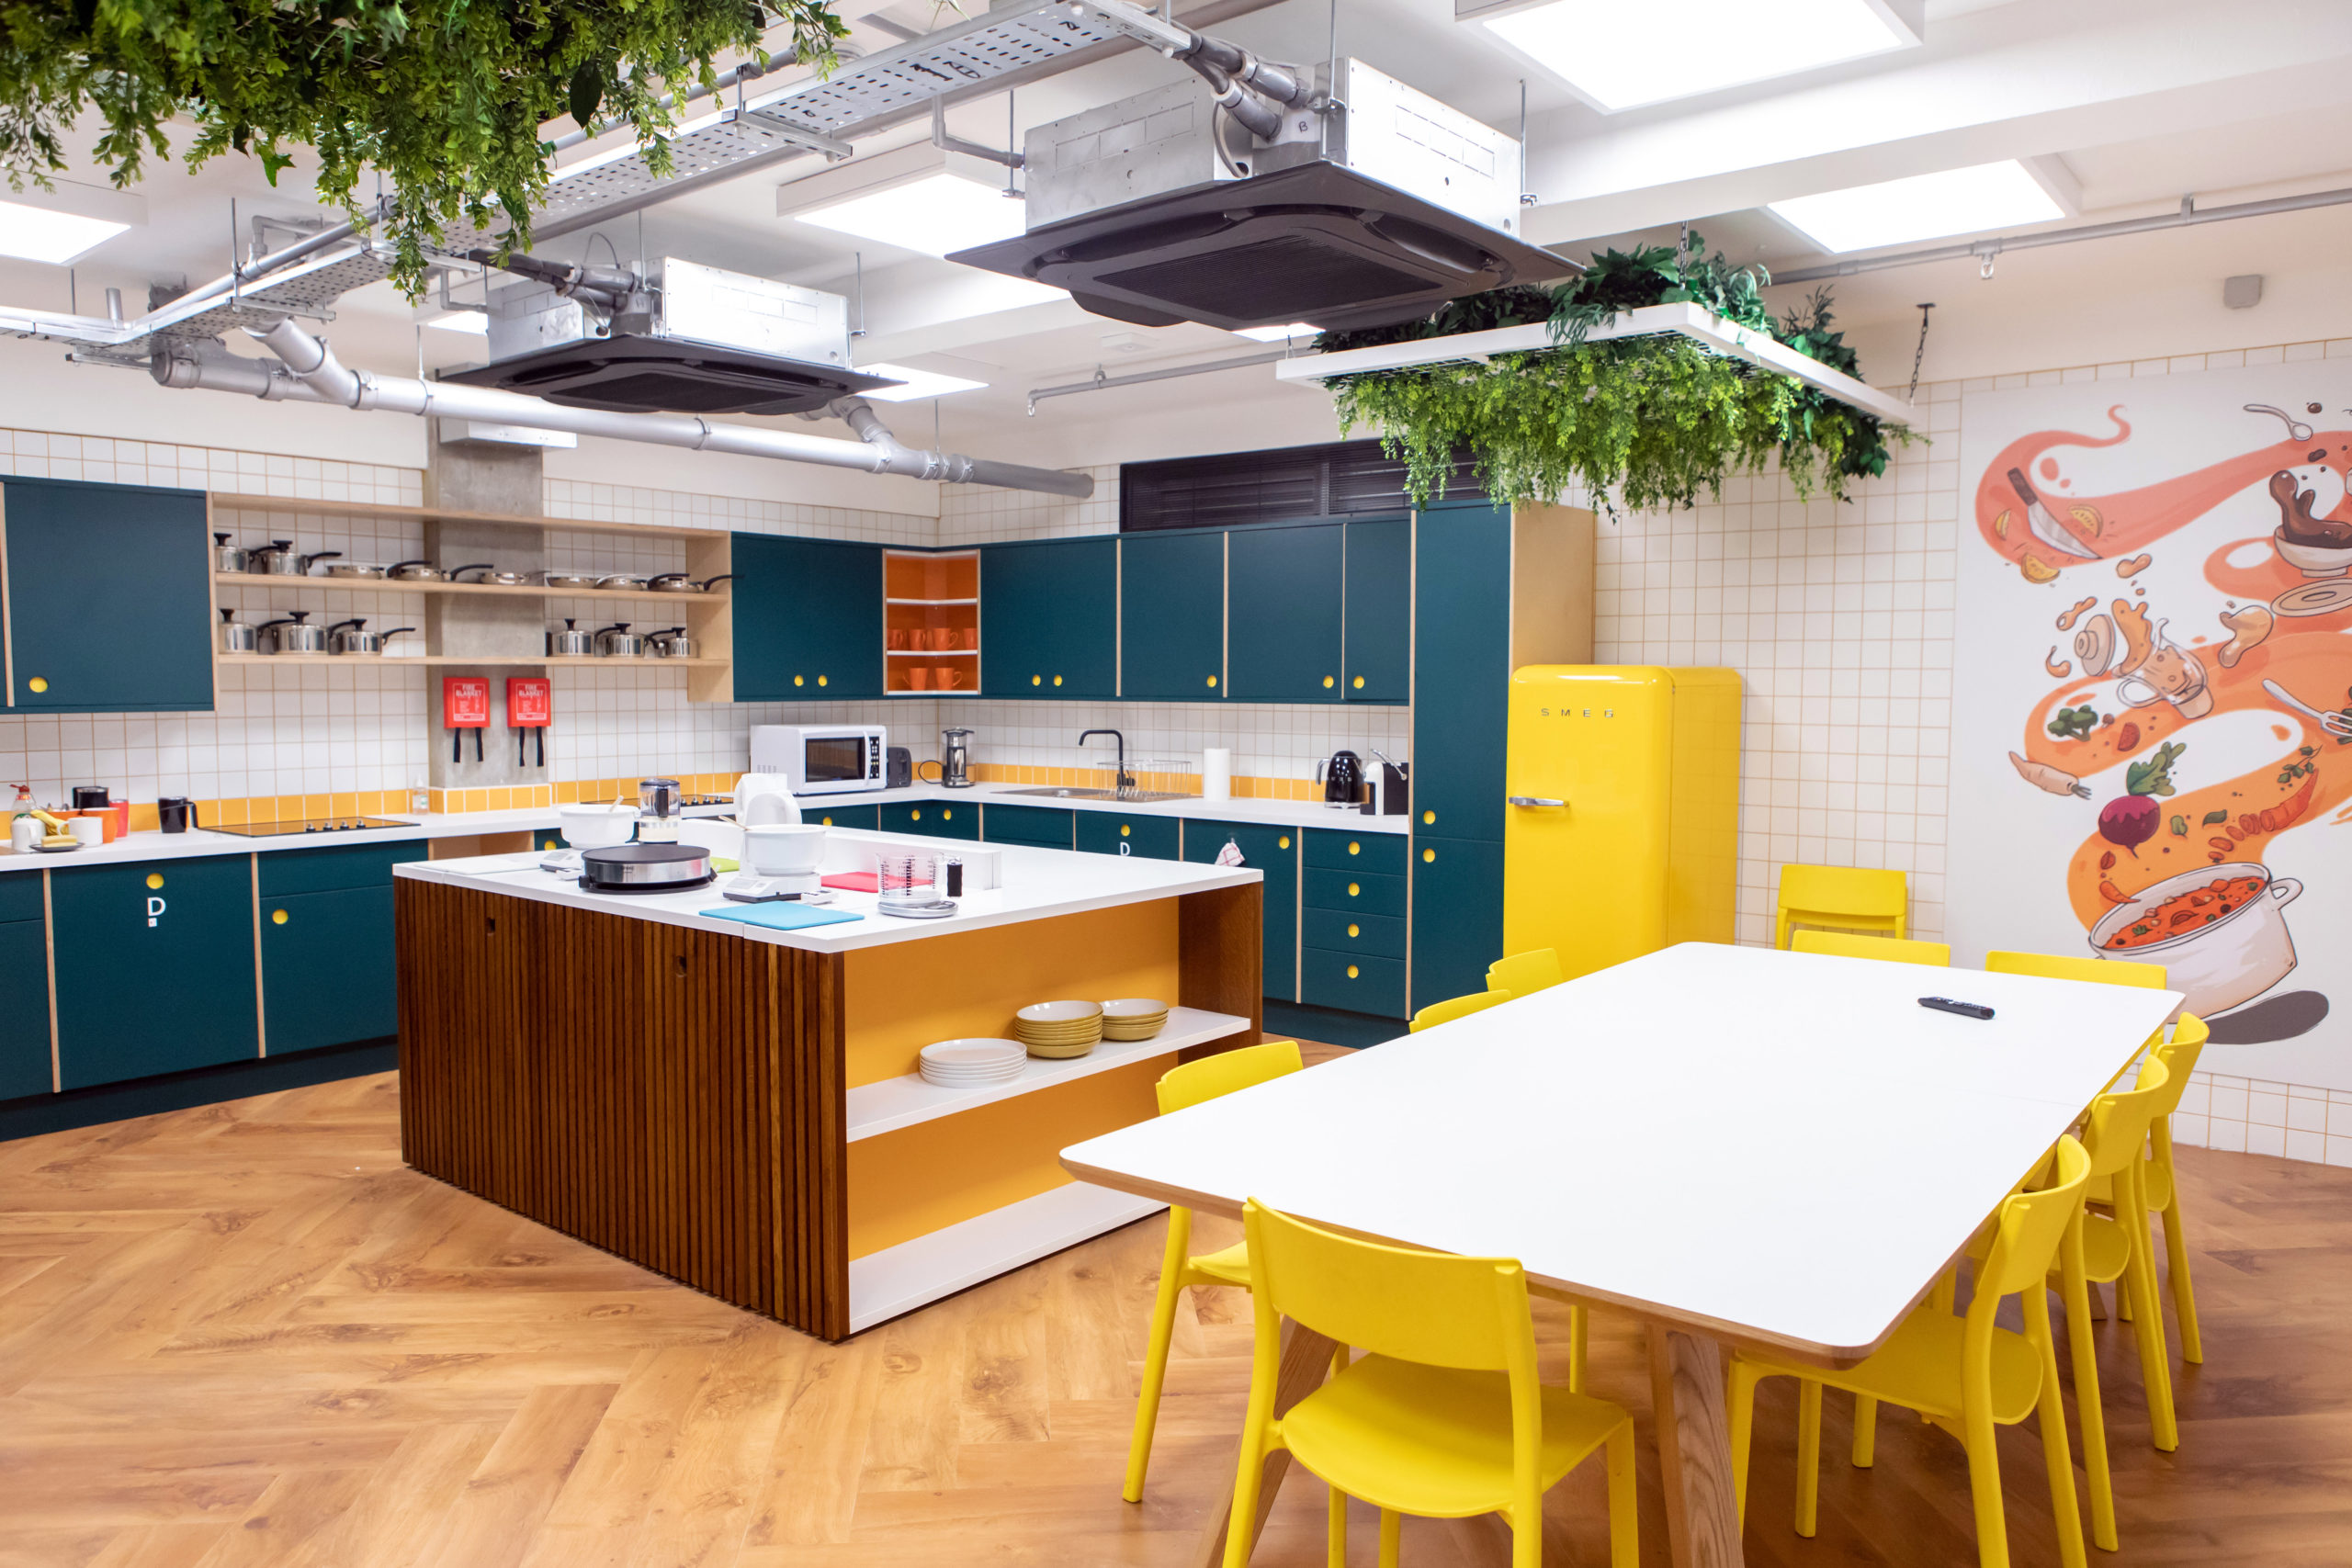 A large kitchen with square island, colour contrasting cabinets and a yellow table and chairs